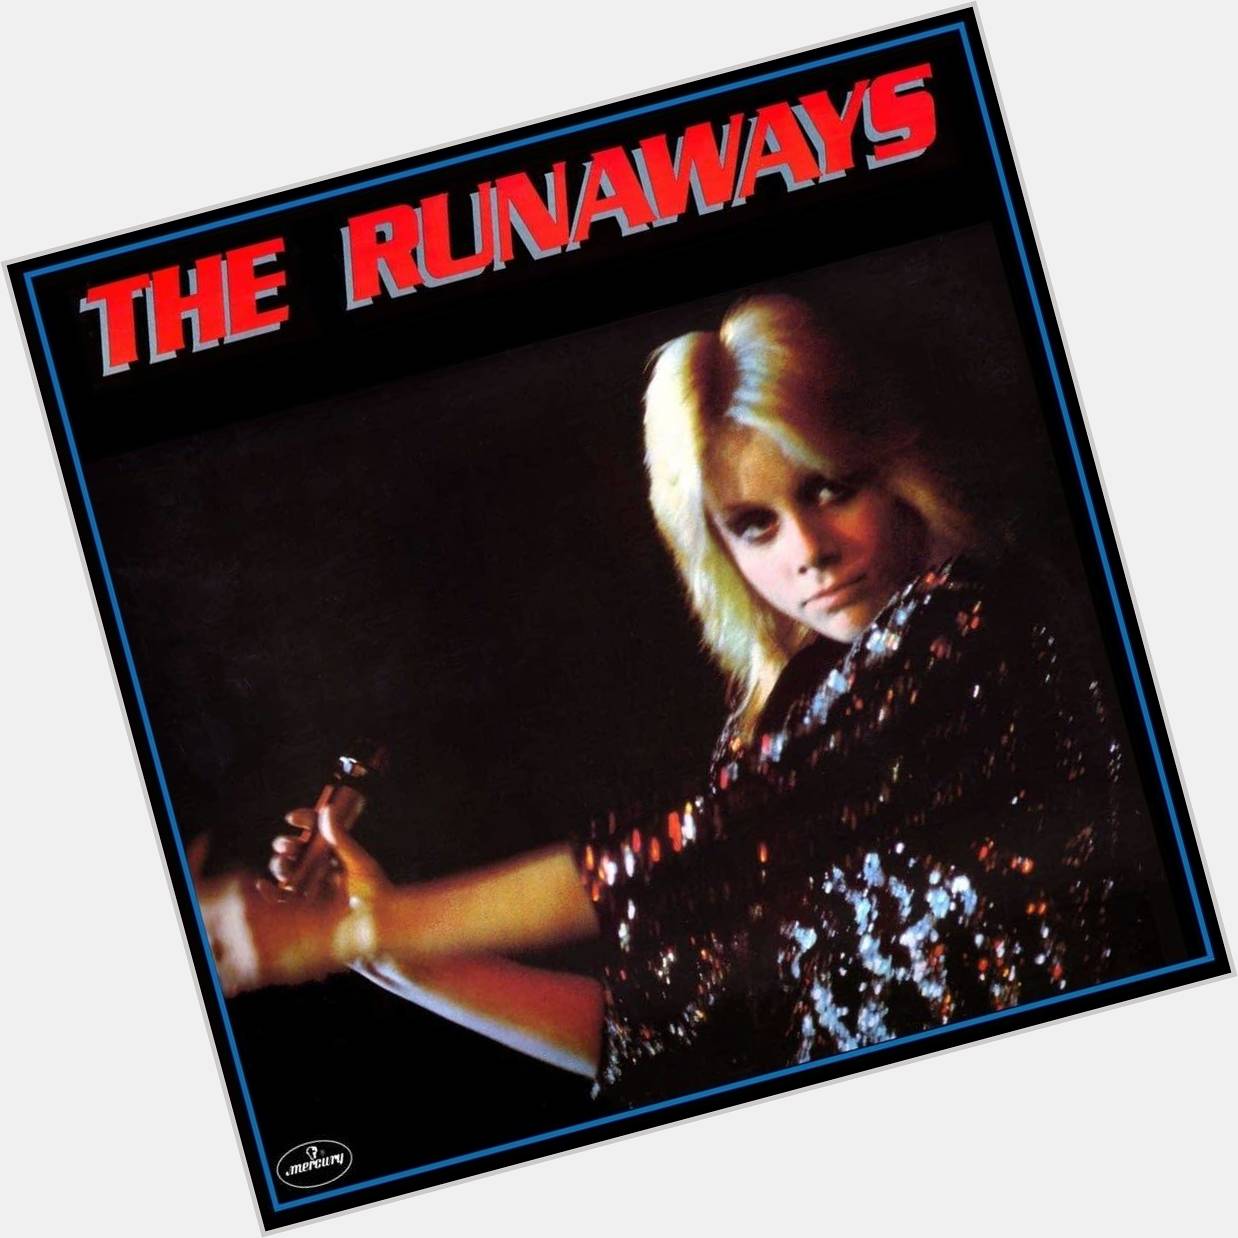 Cherie Currie, solo artist and former lead vocalist of the Runaways, turns 58 today.  